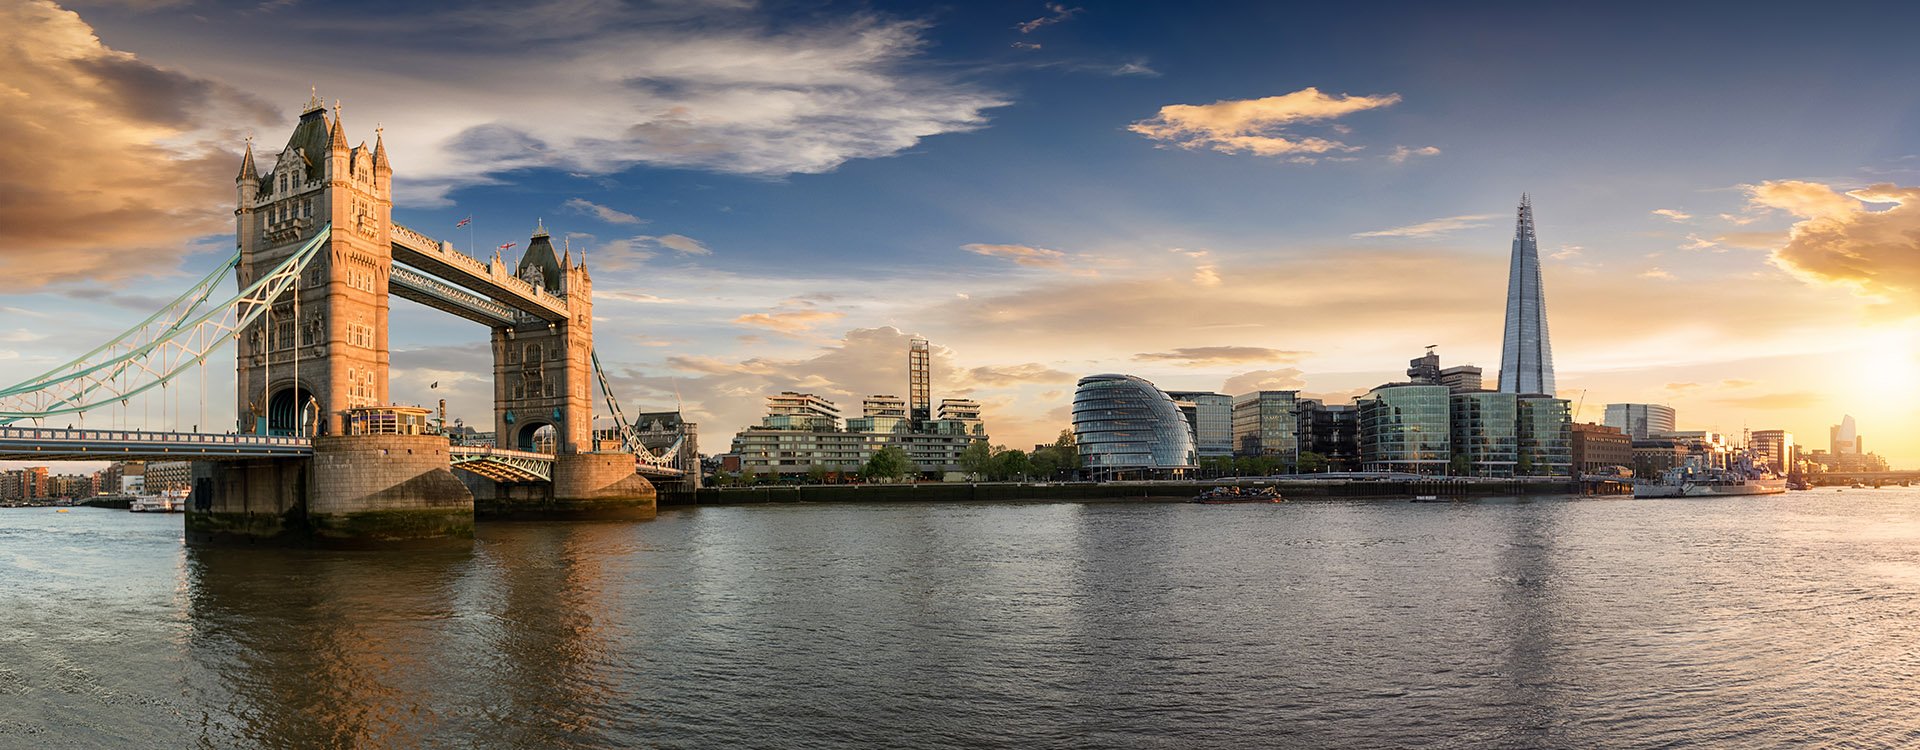 The skyline of London: from the Tower Bridge to London Bridge during sunset time, United Kingdom